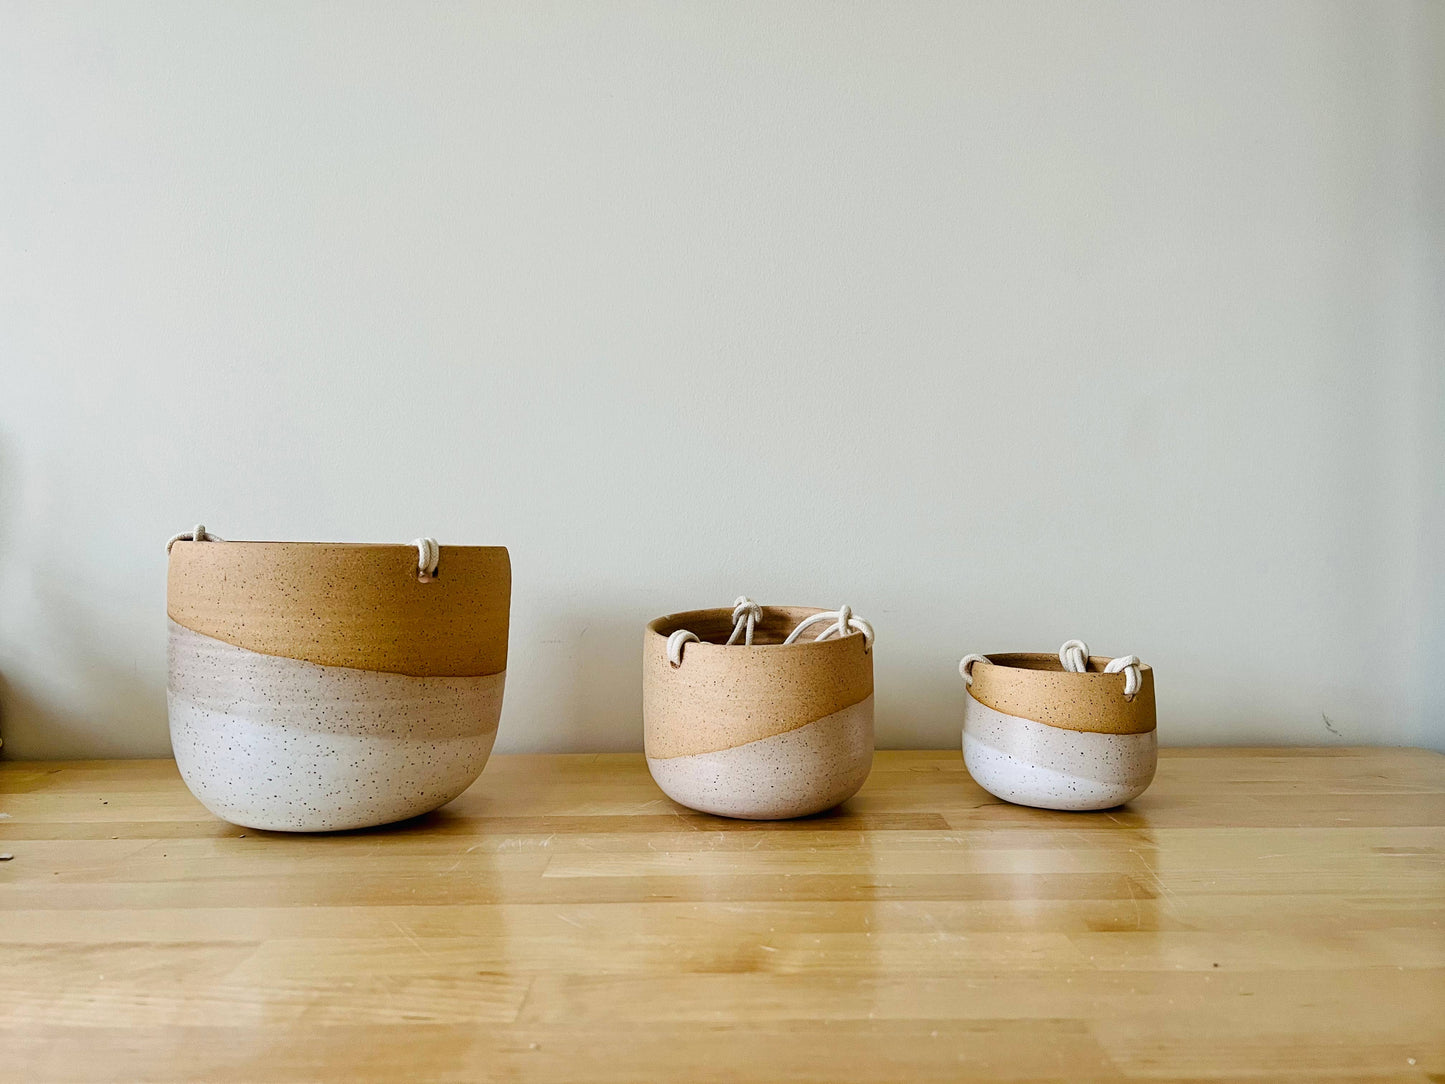 Handmade ceramic planter for your little guys in the home. Earth tone clay with a natural glaze. Includes a drainage hole, cotton cord, and 1" brass ring.